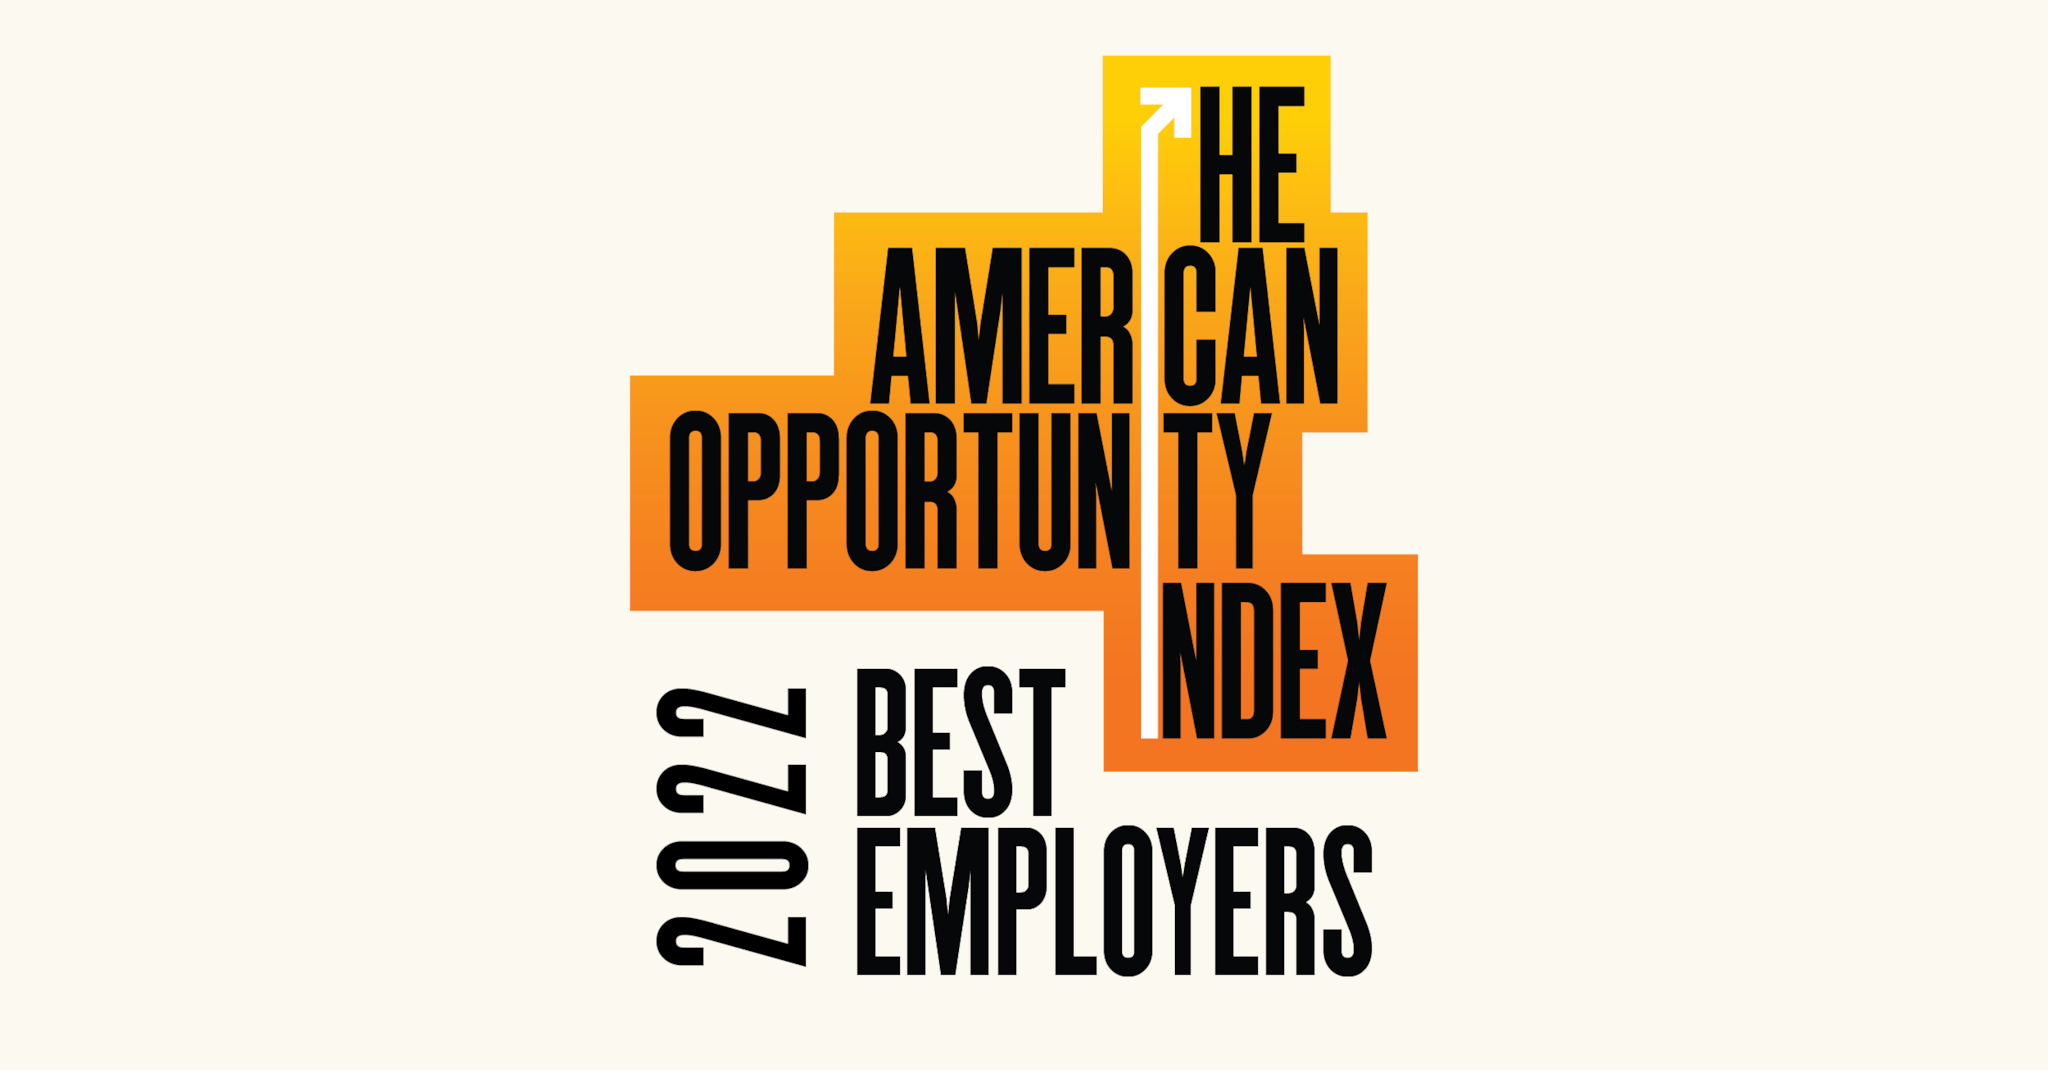 American-Express-Ranks-No.-2-Overall-on-American-Opportunity-Index